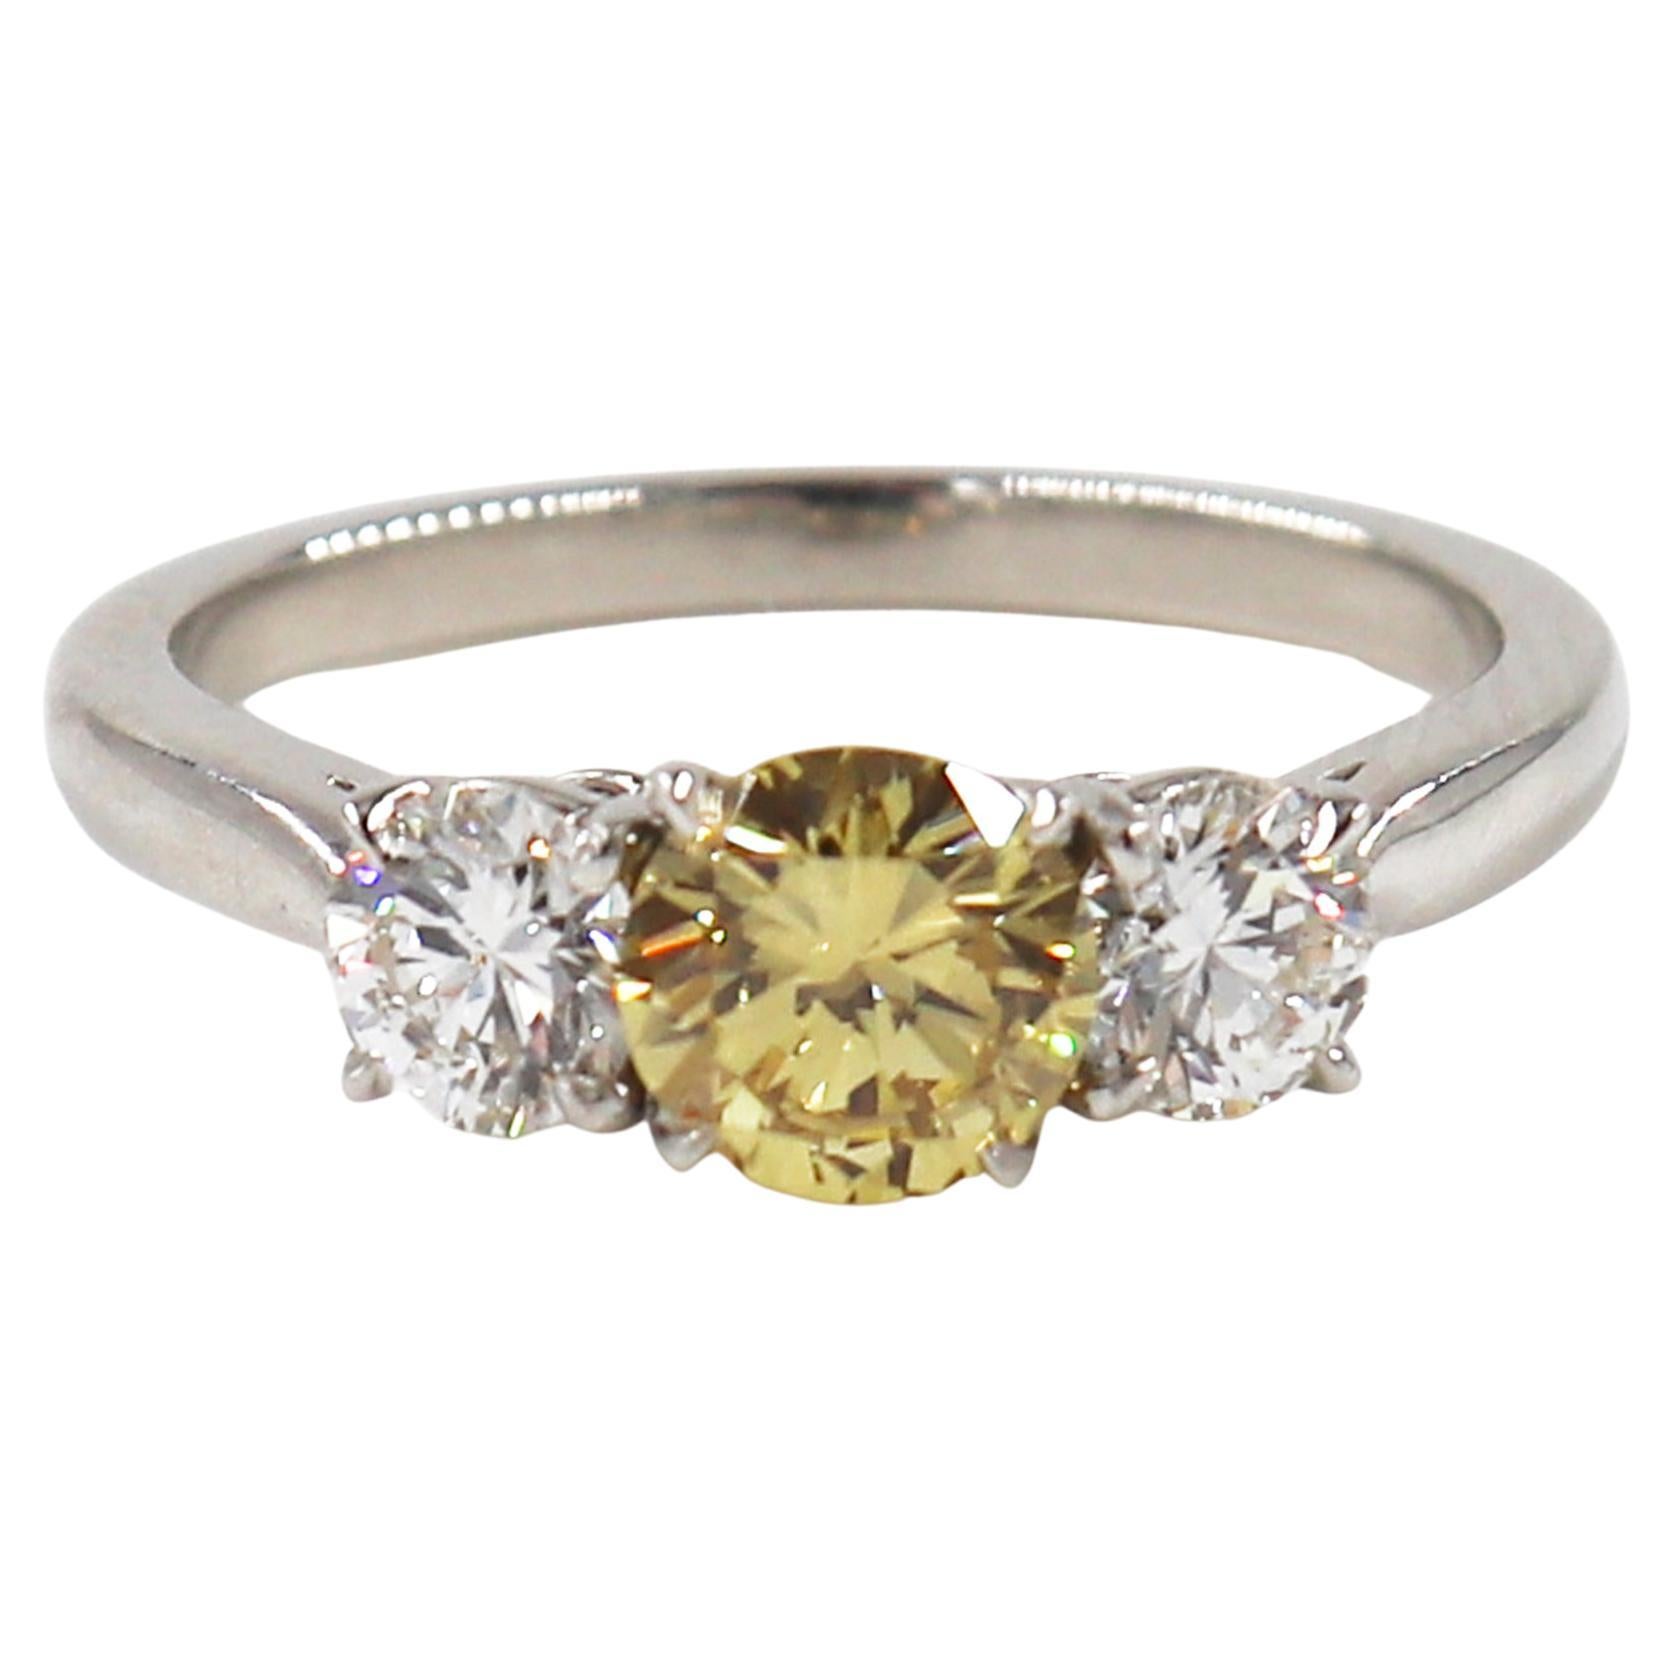 This charming three stone ring by J. Birnbach ring is a unique take on a timeless design. The center diamond is a round 0.66 carat Fancy Intense yellow diamond, and it is accented by two round diamonds, which together are 0.62 carats. The rich,